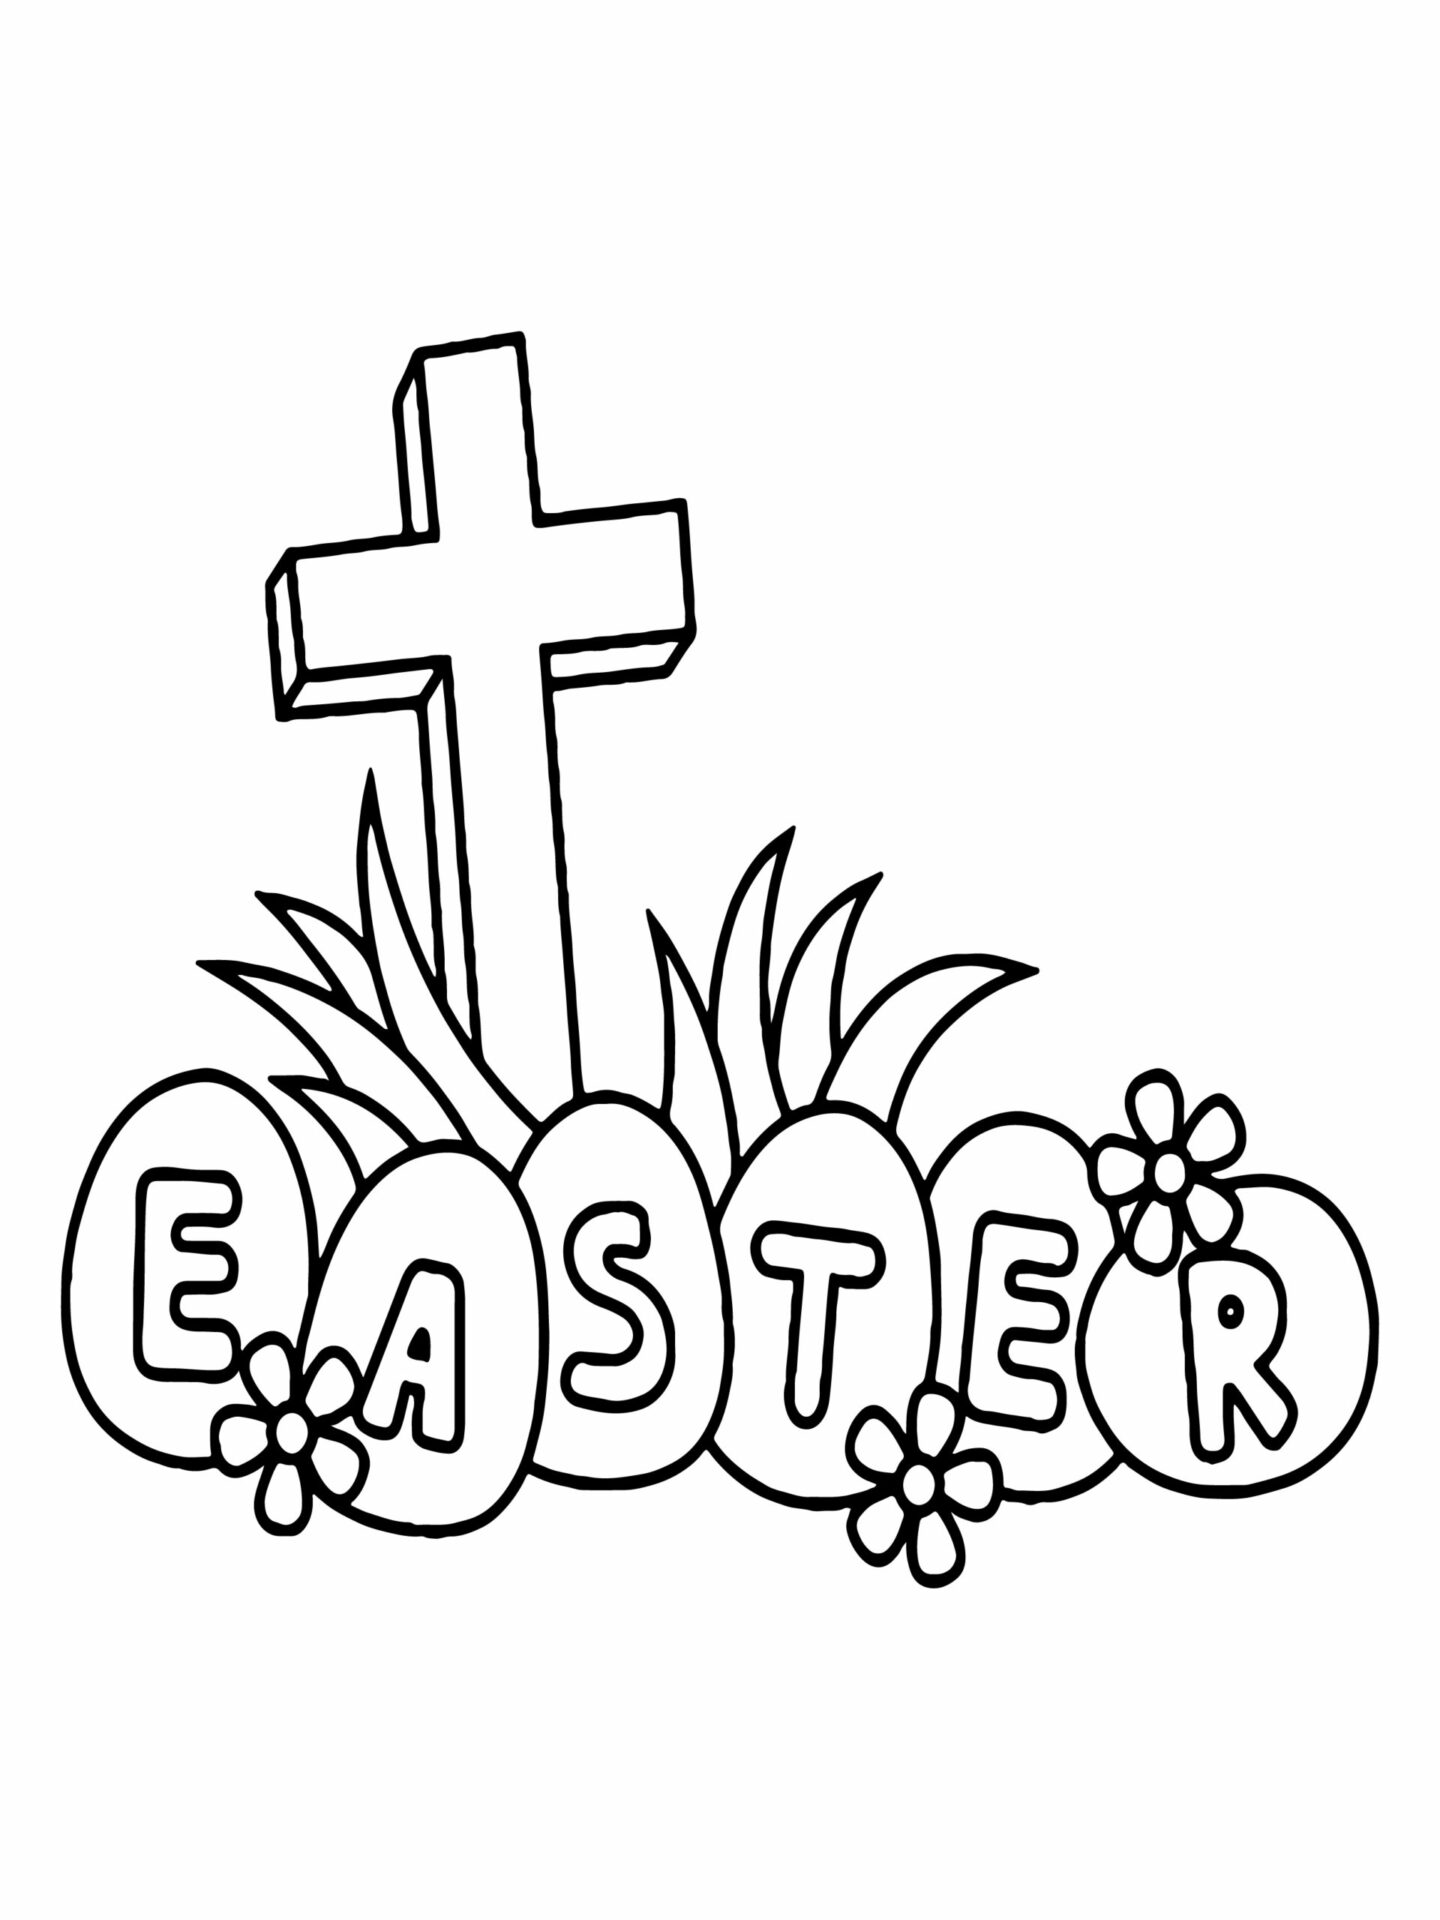 delighted easter Coloring Page - Free Printable Coloring Pages for Kids